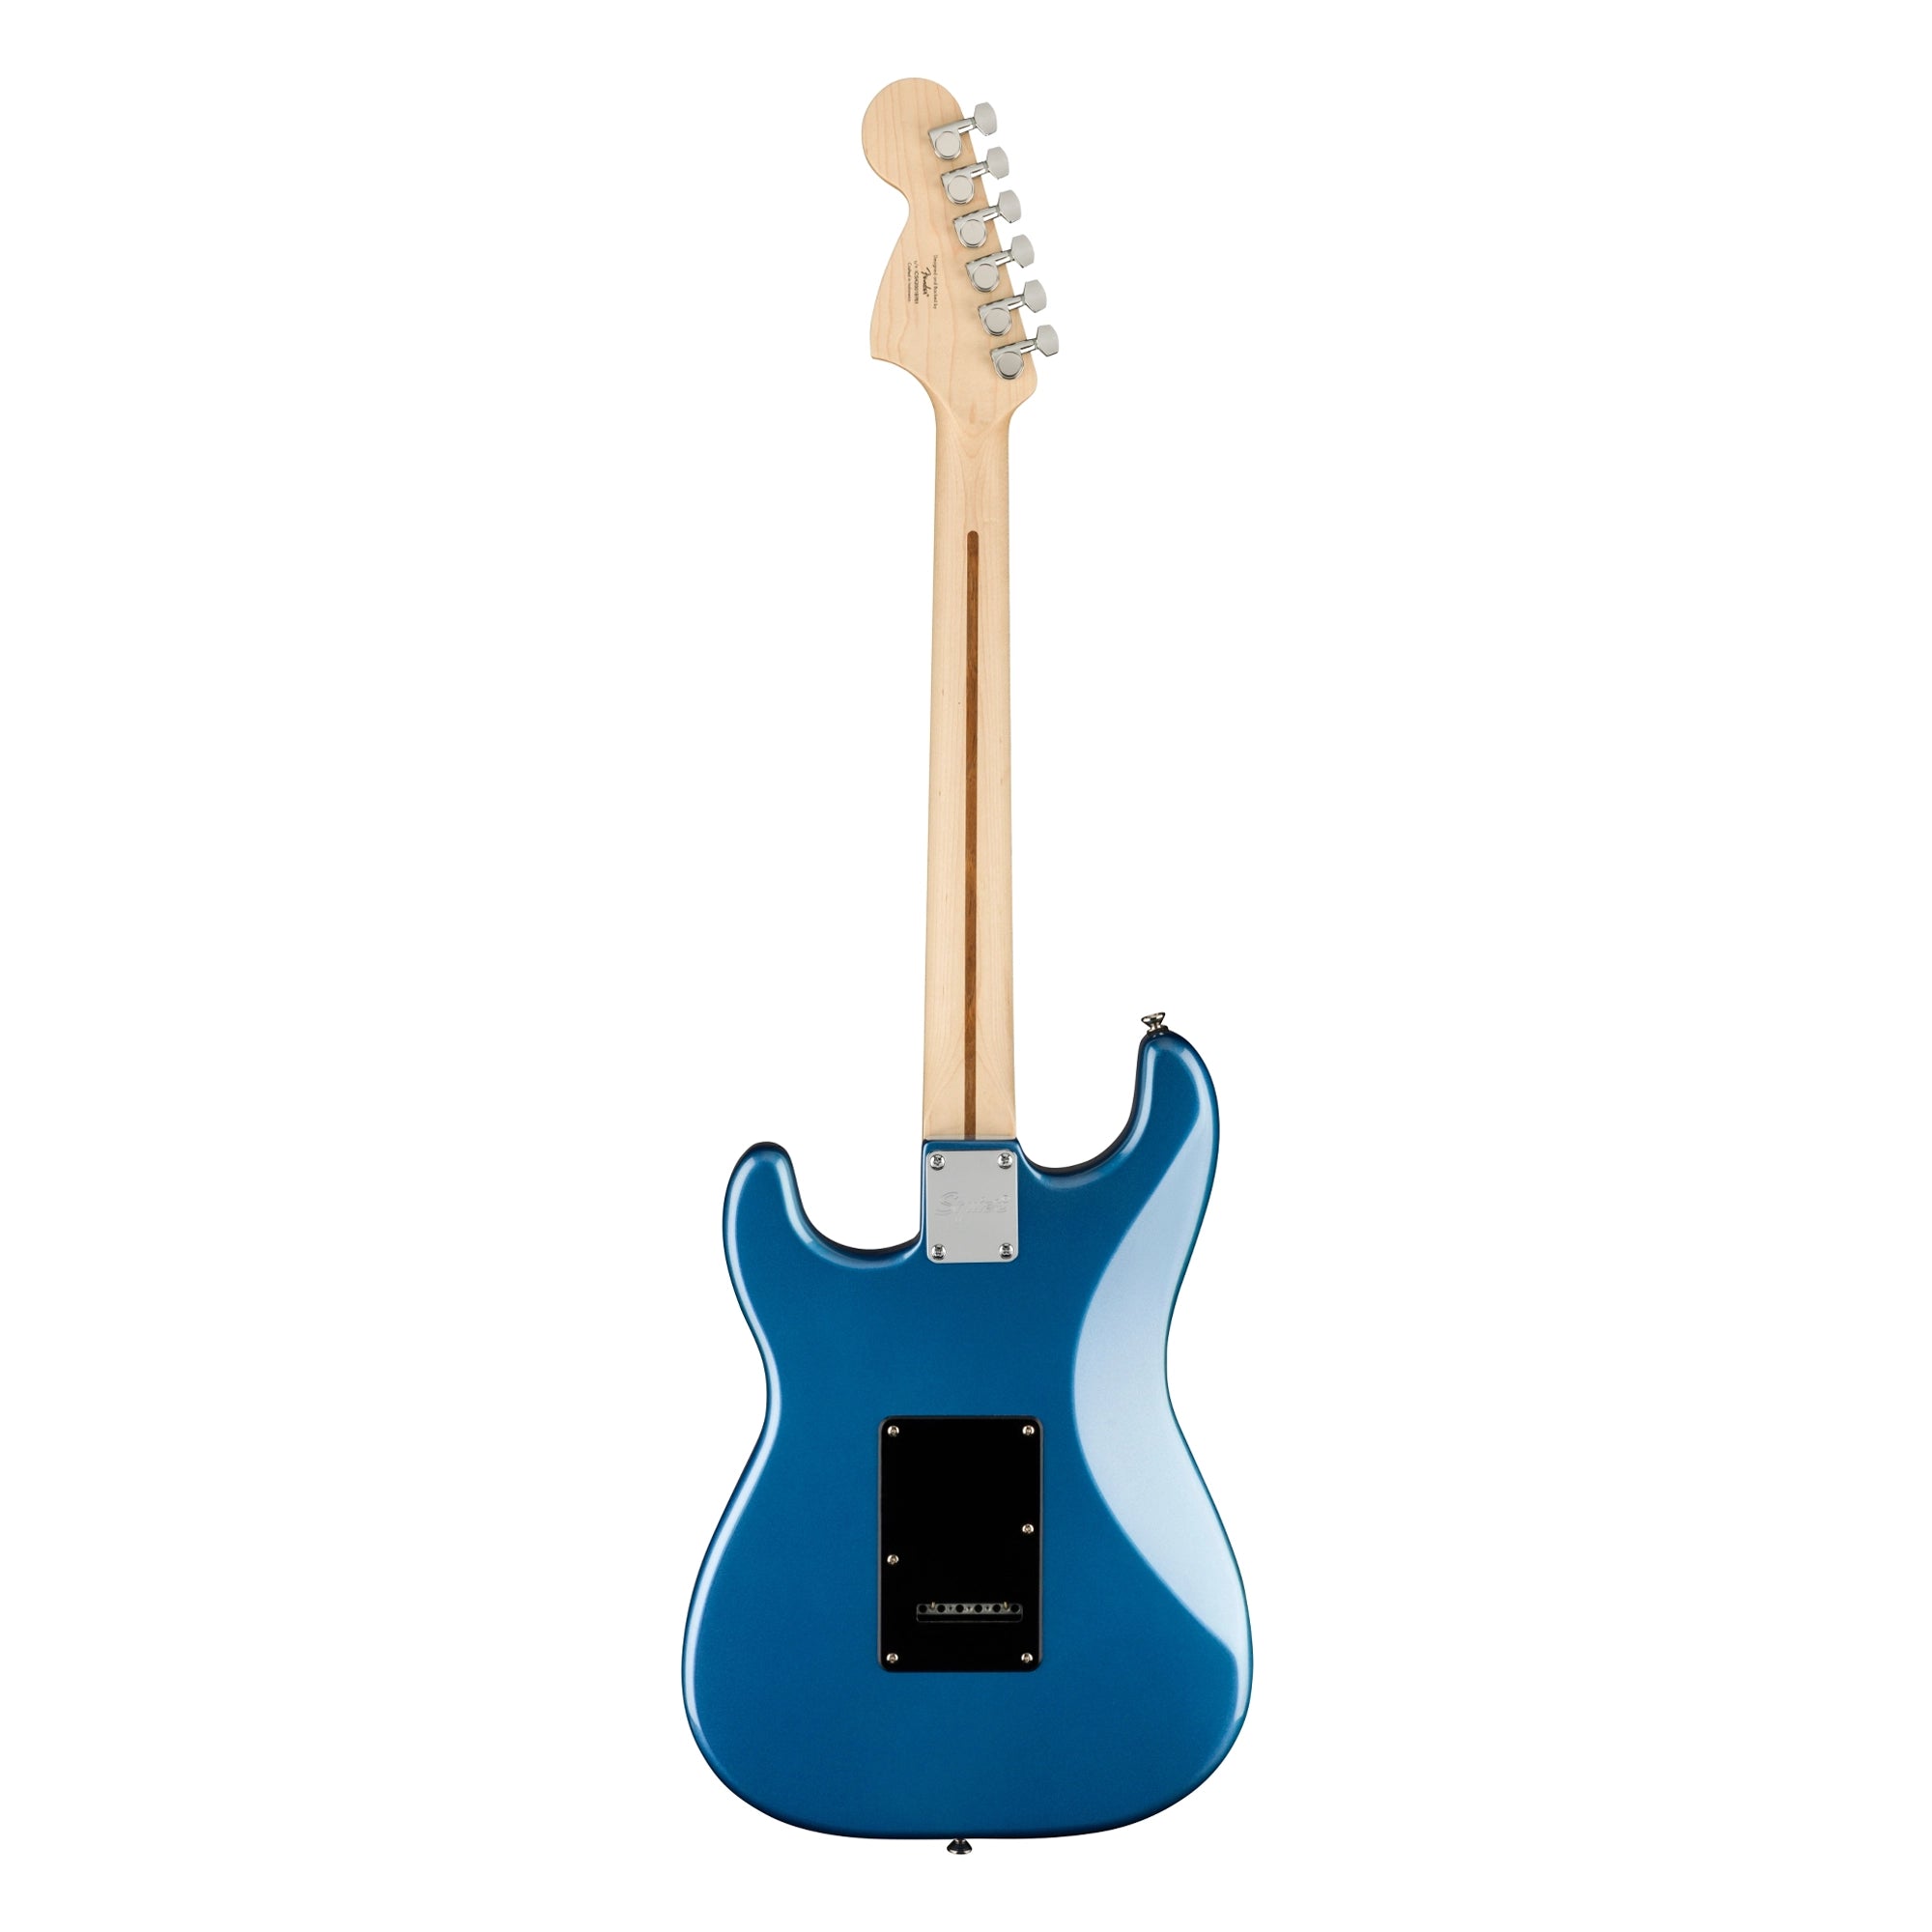 Squier Affinity Series Stratocaster Electric Guitar - Lake Placid Blue